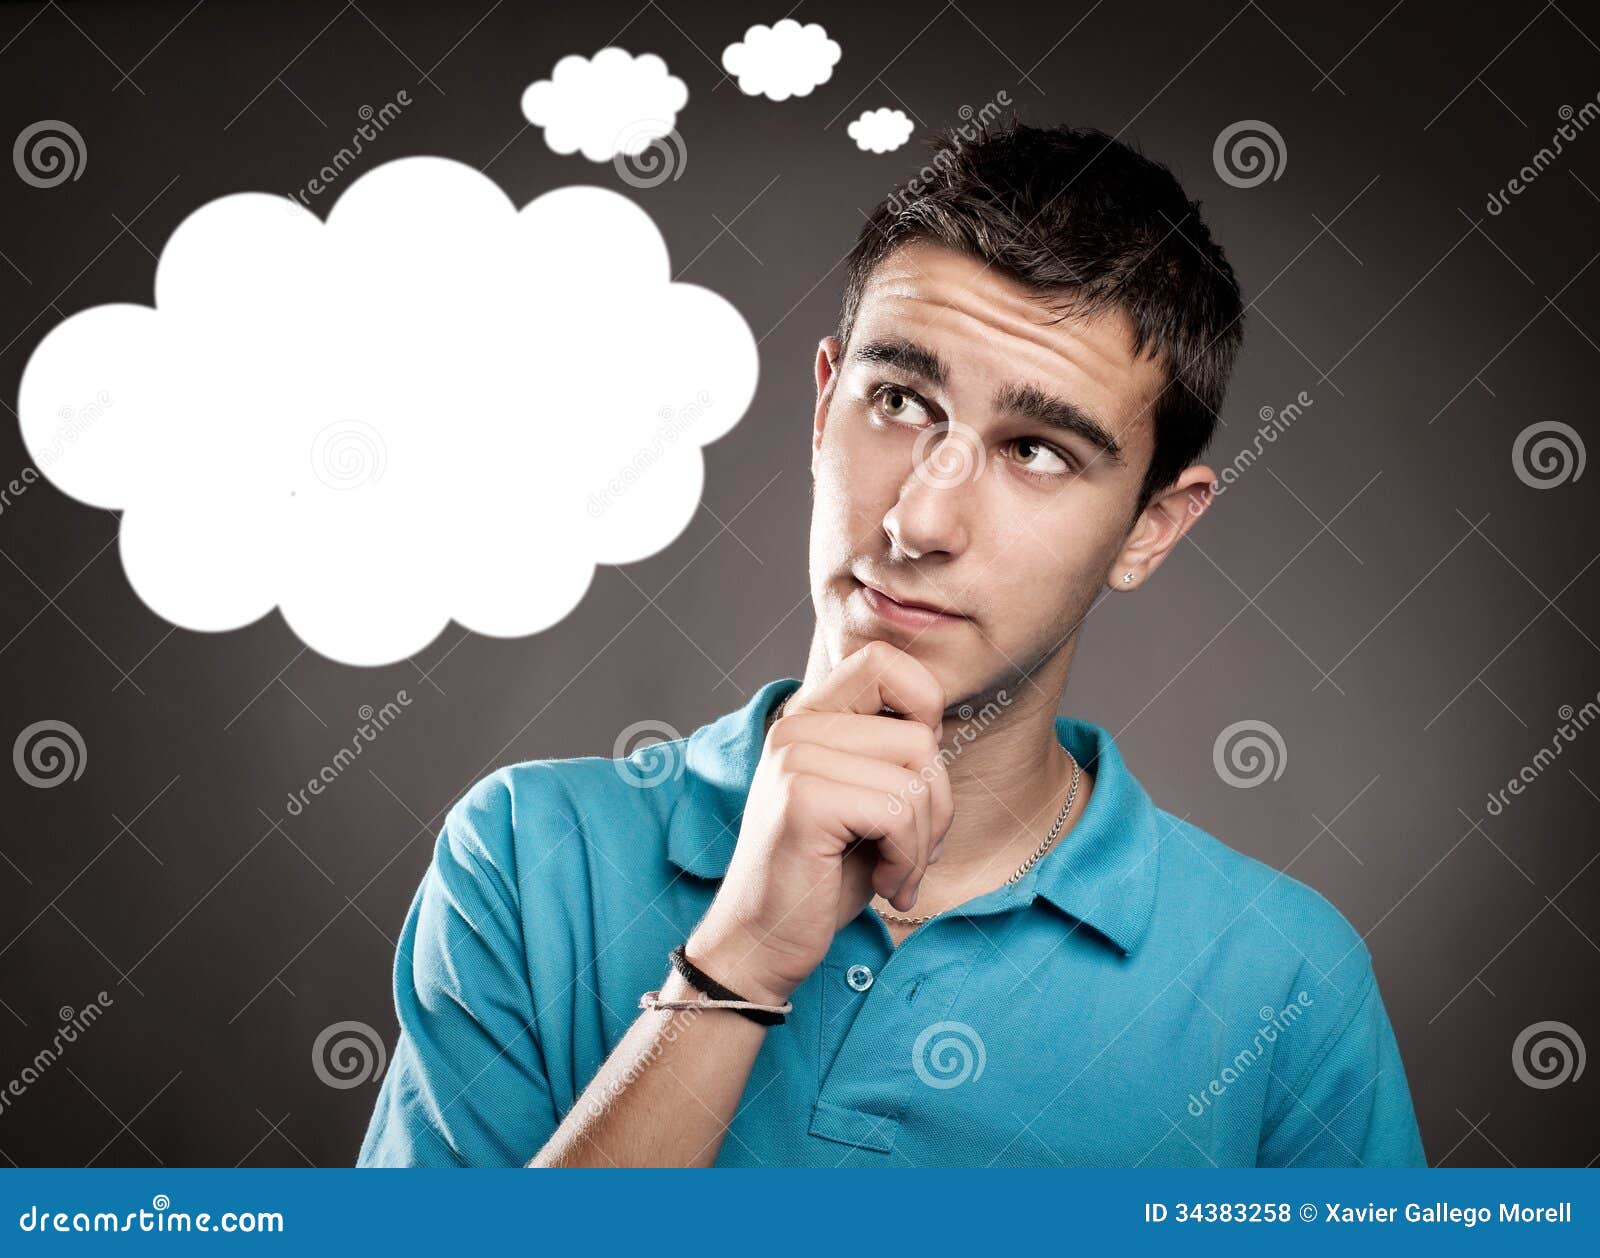 young-man-thinking-cloud-over-his-head-34383258.jpg